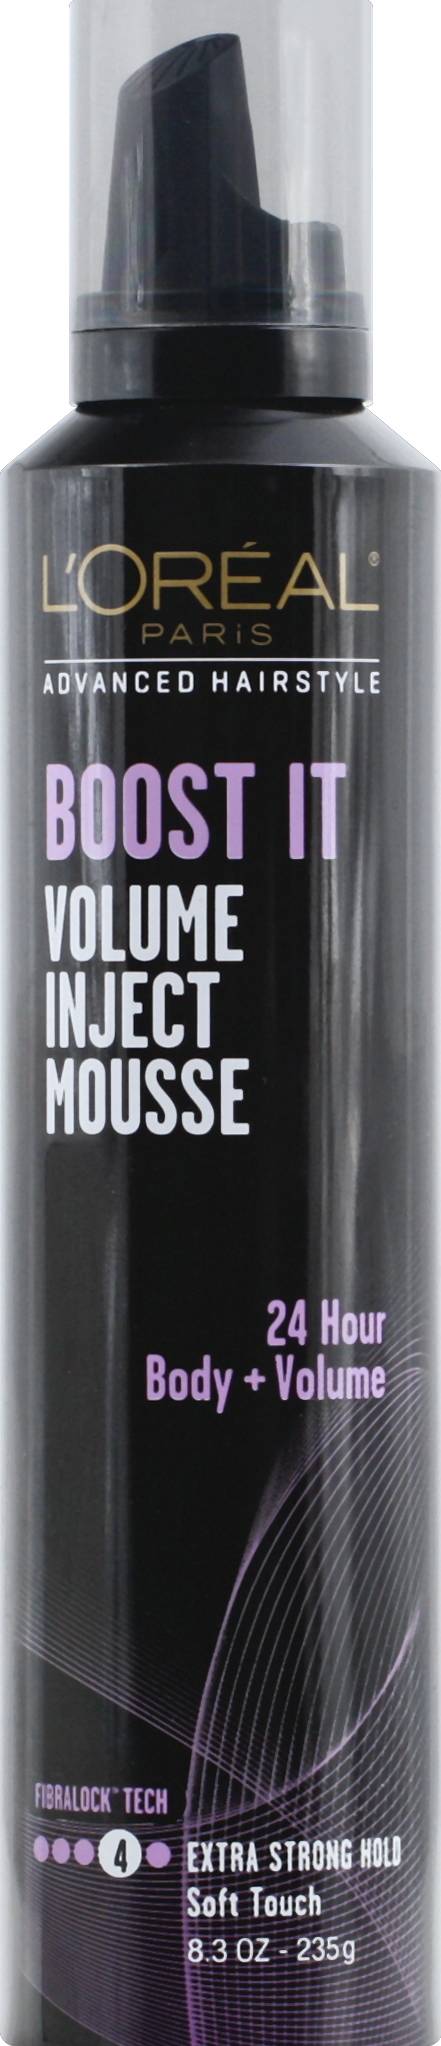 L'oreal Advance Hairstyle Boost It Volume Inject Mousse